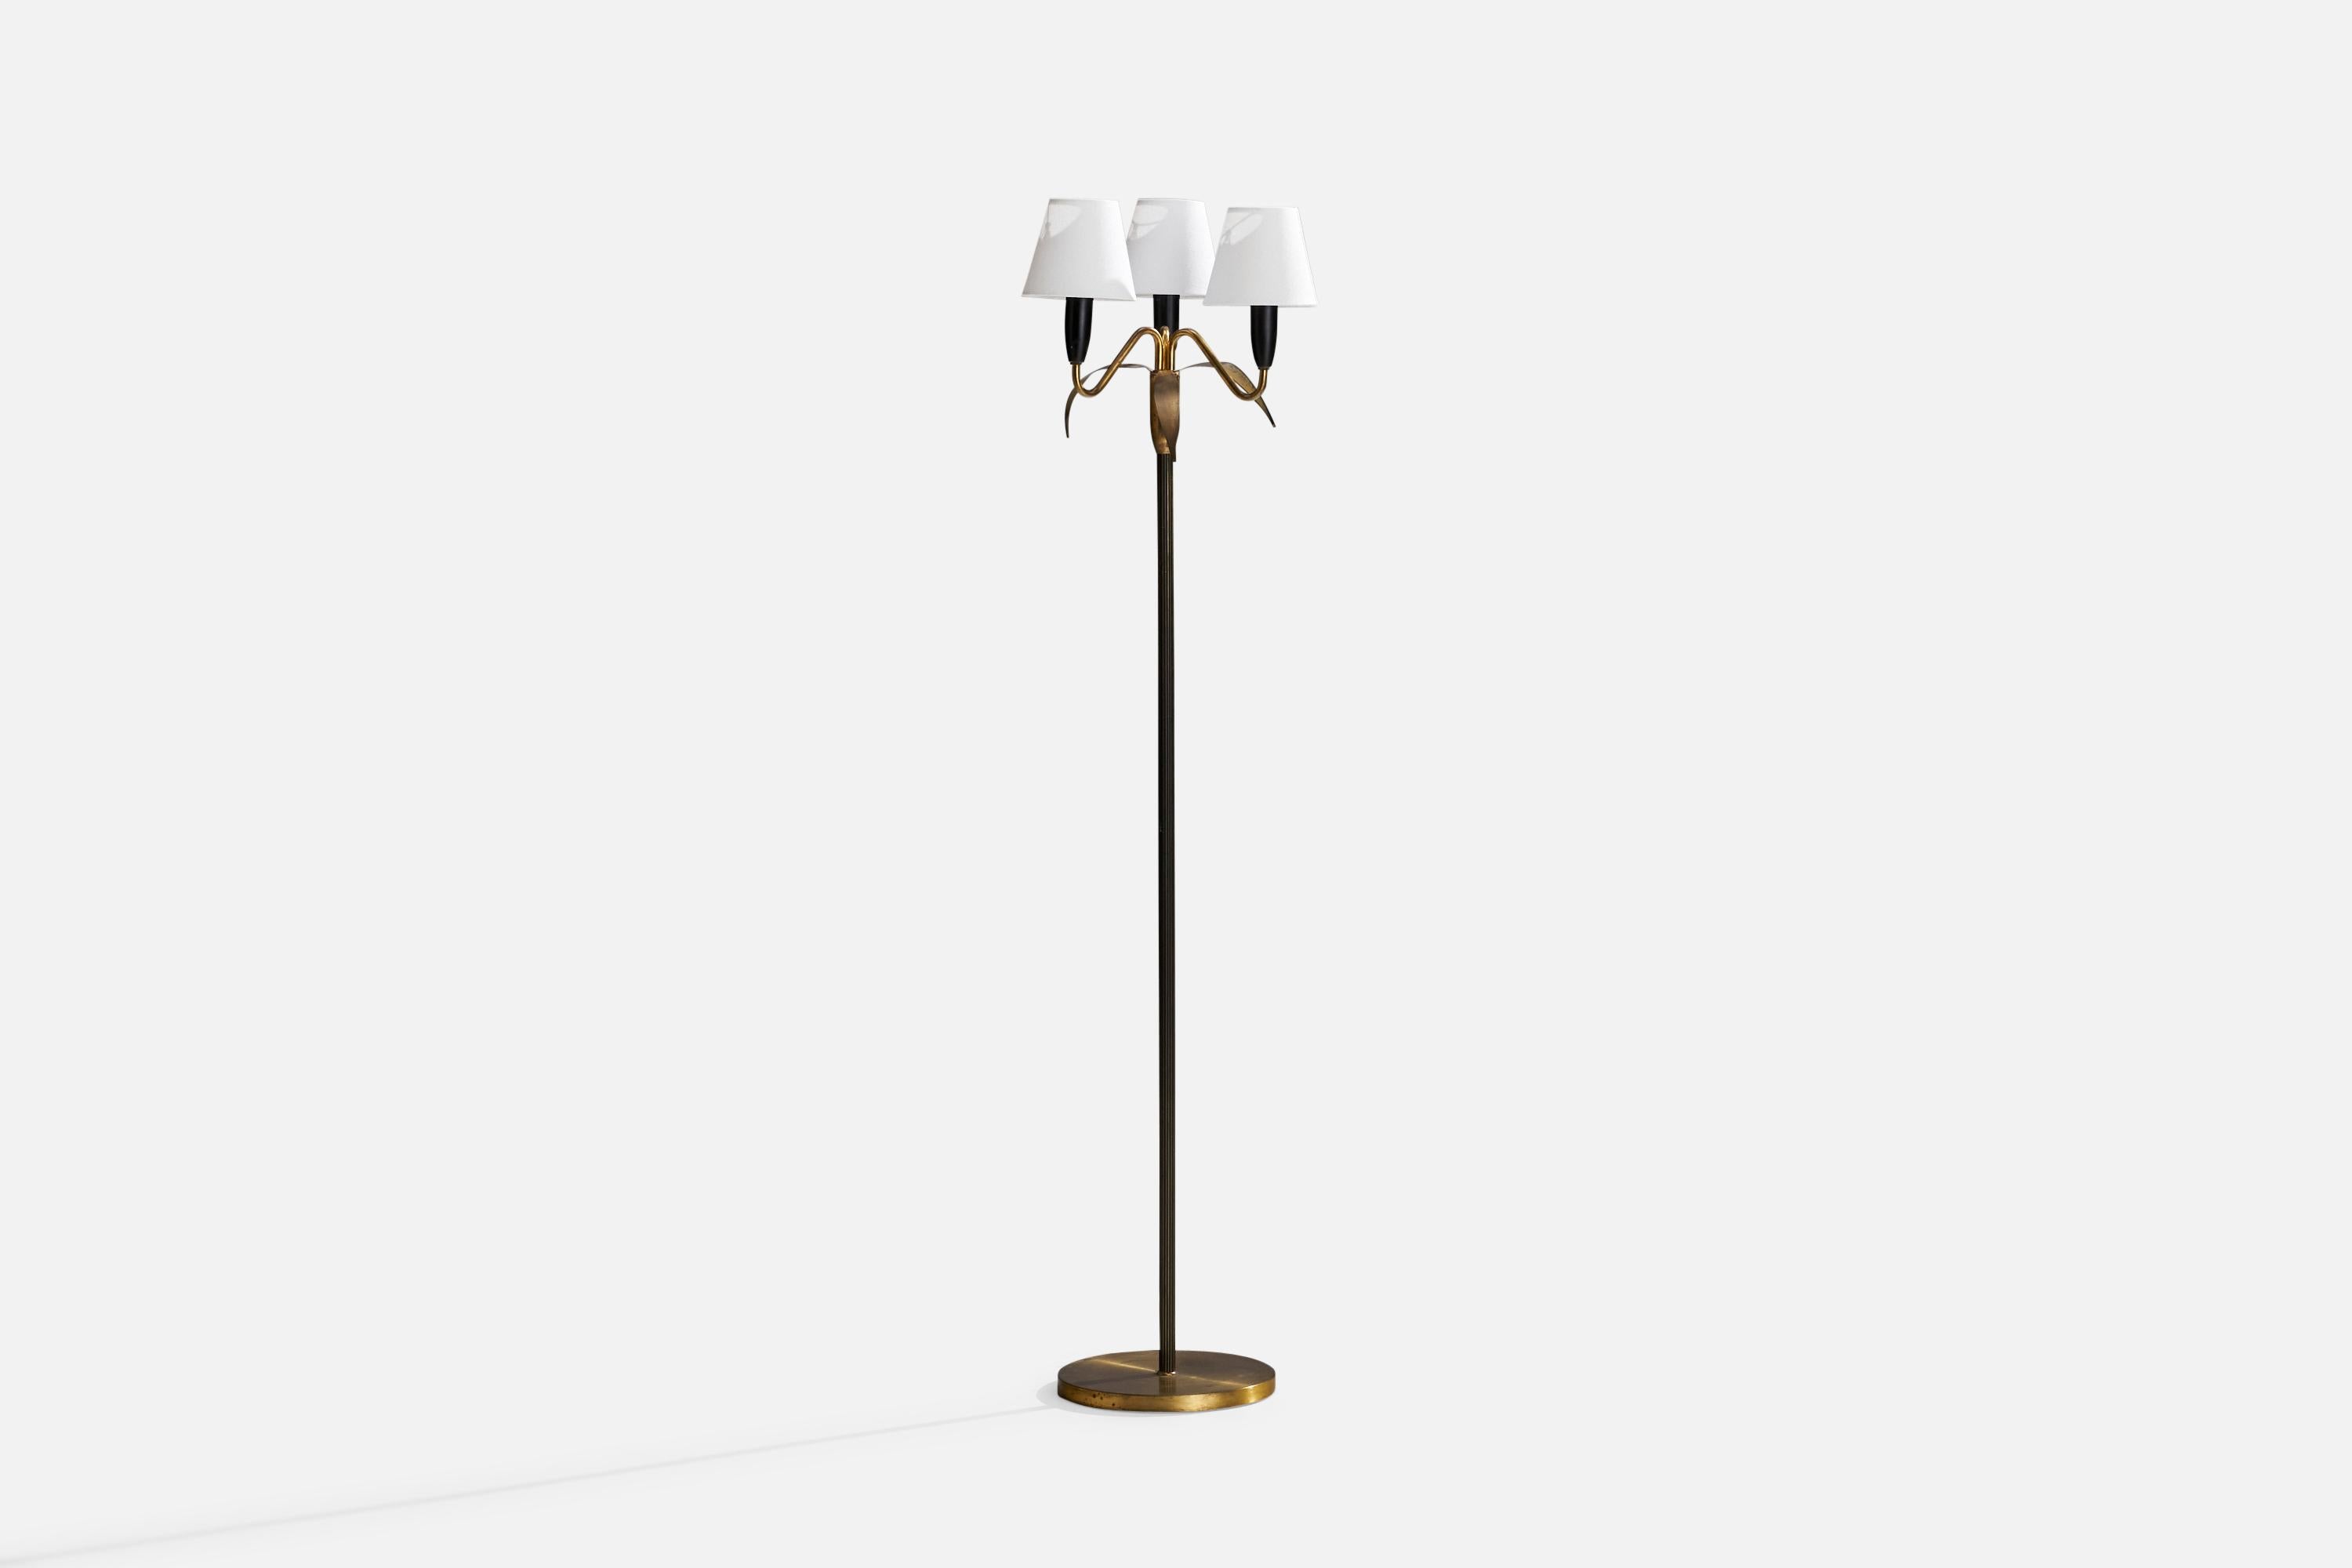 A brass, black-lacquered metal and white fabric floor lamp designed and produced in Sweden, c. 1960s.

Overall Dimensions (inches): 55”  H x 14” W x 7” D
Stated dimensions include shade.
Bulb Specifications: E-26 Bulb
Number of Sockets: 3
All